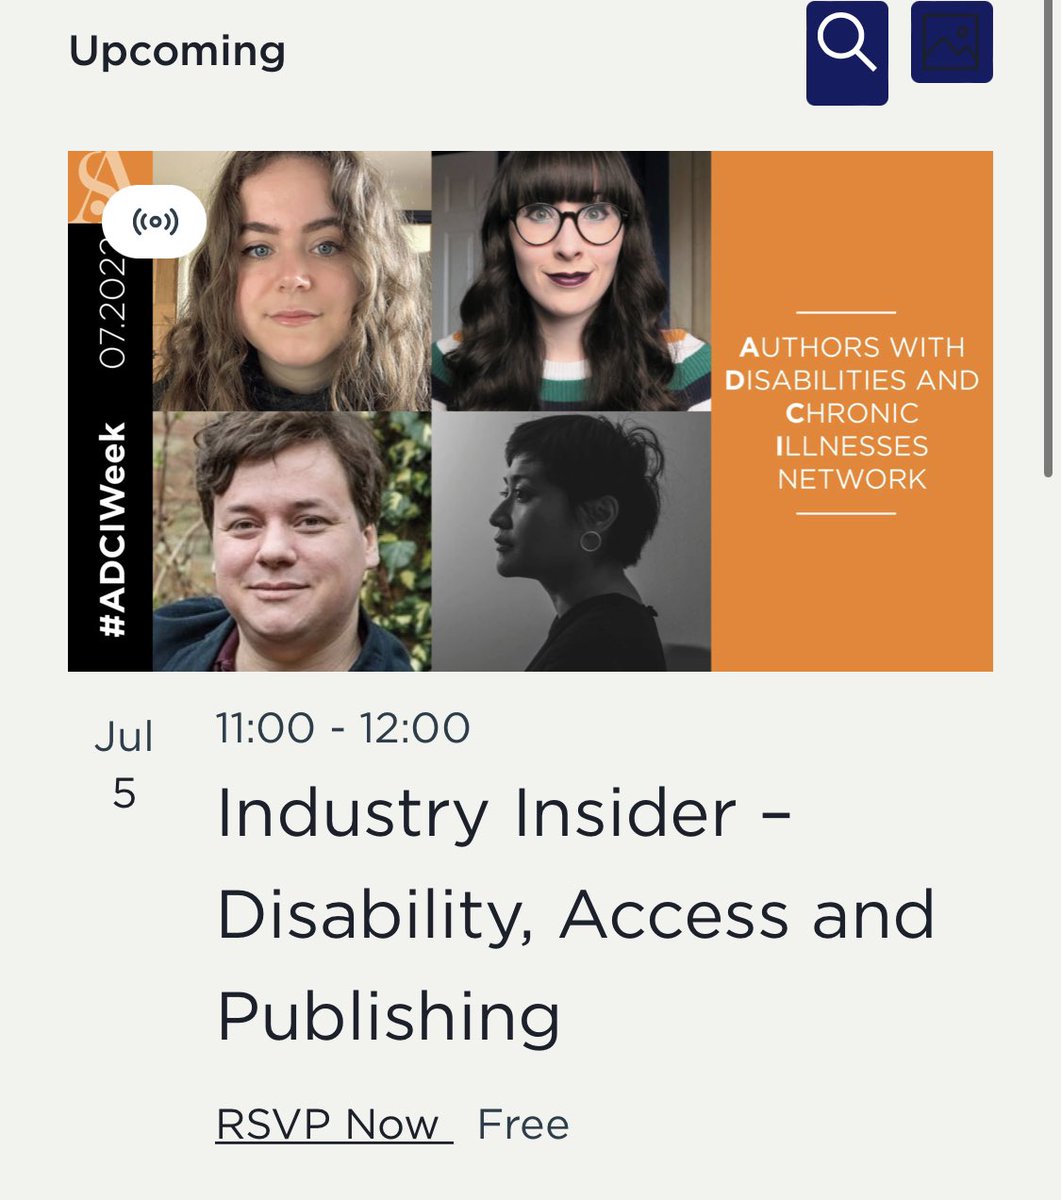 Very excited for the @Soc_of_Authors event I’m chairing next week where we’ll be discussing disability and publishing - including advice for industry professionals and authors - with @elliedrewry, @mailbykite and James Catchpole! www2.societyofauthors.org/events/tag/adc…